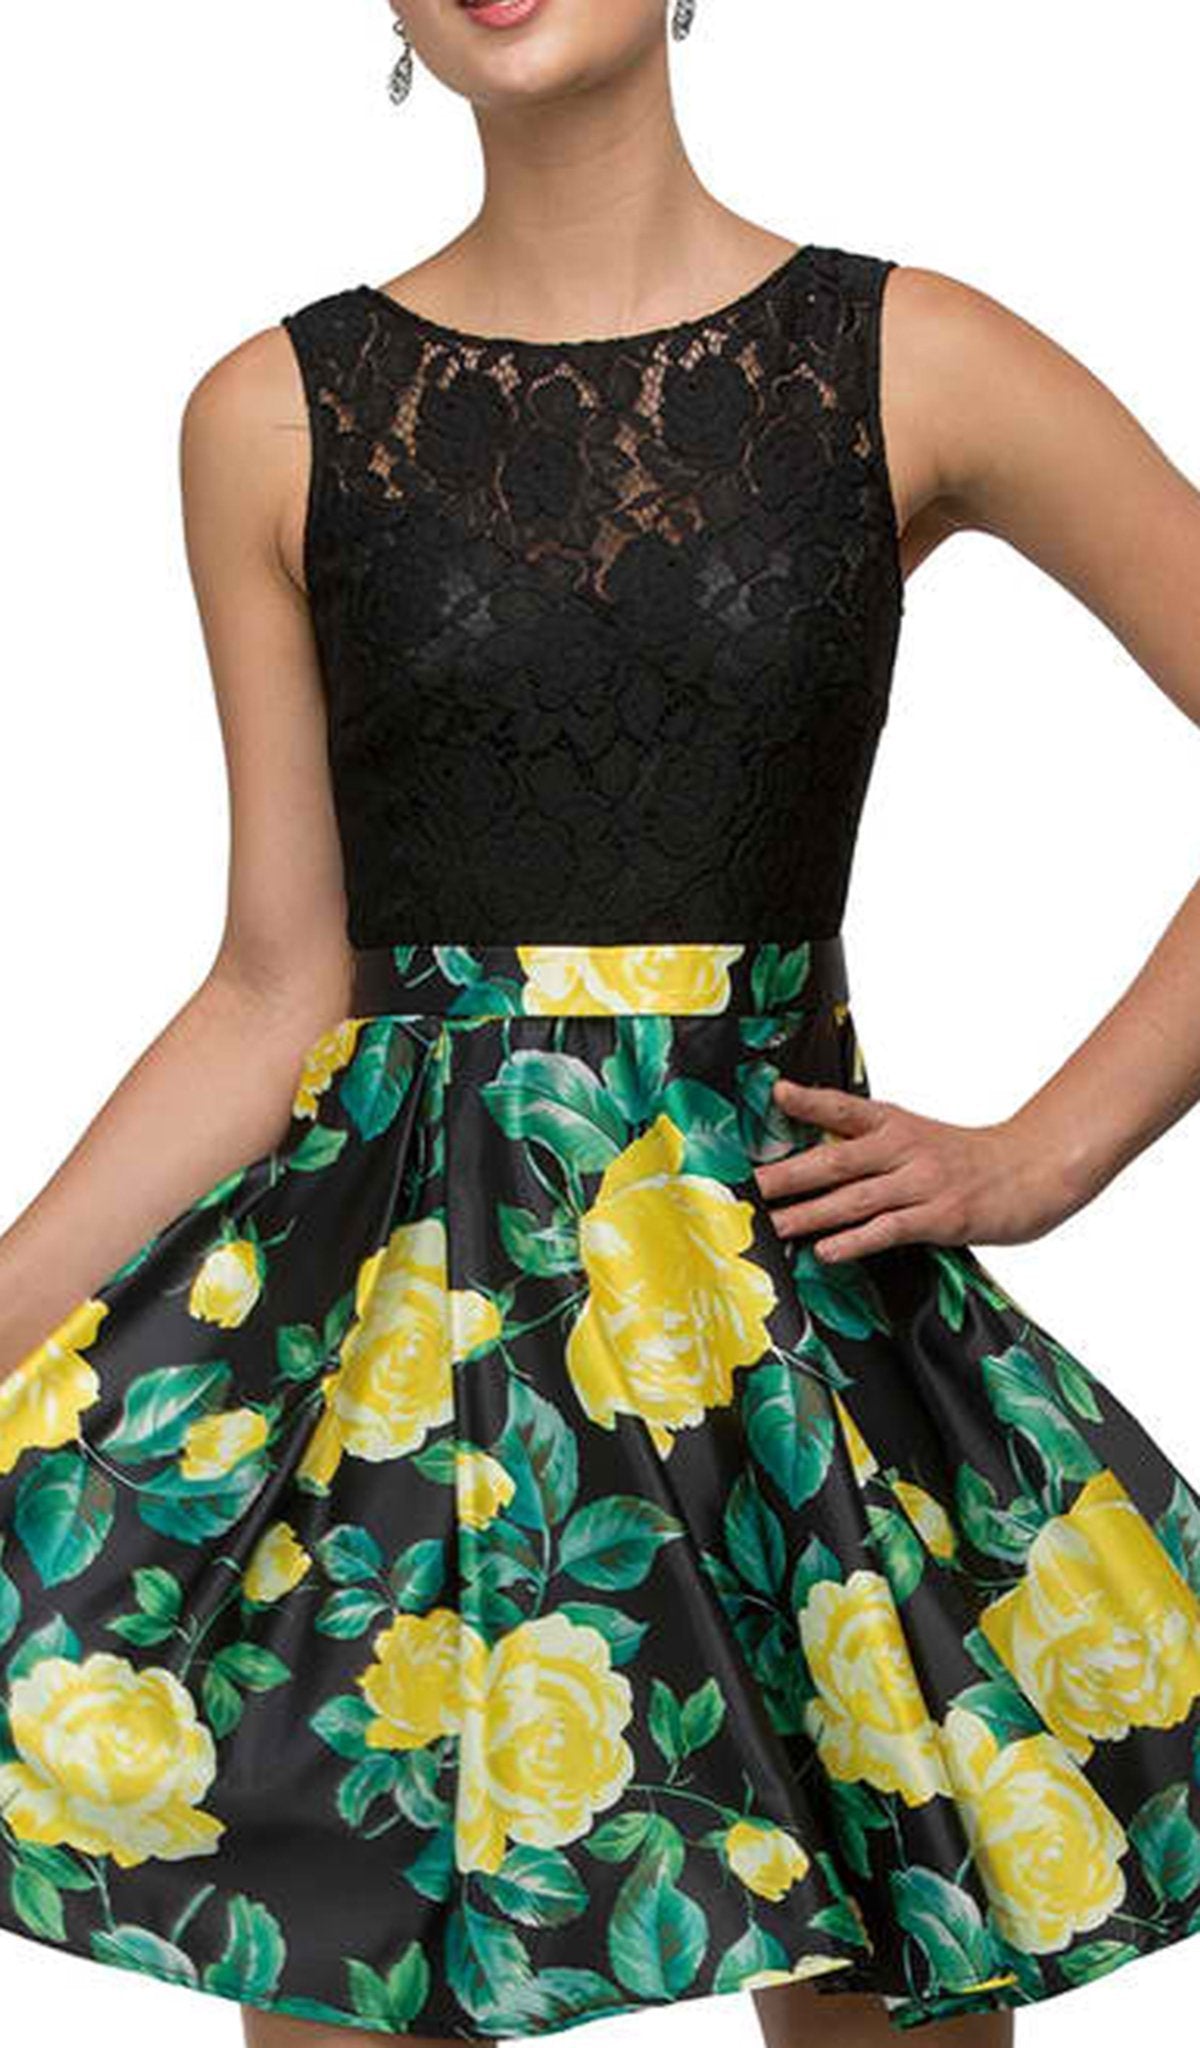 Dancing Queen - 9517 Floral Print Illusion A-Line Cocktail Dress Special Occasion Dress